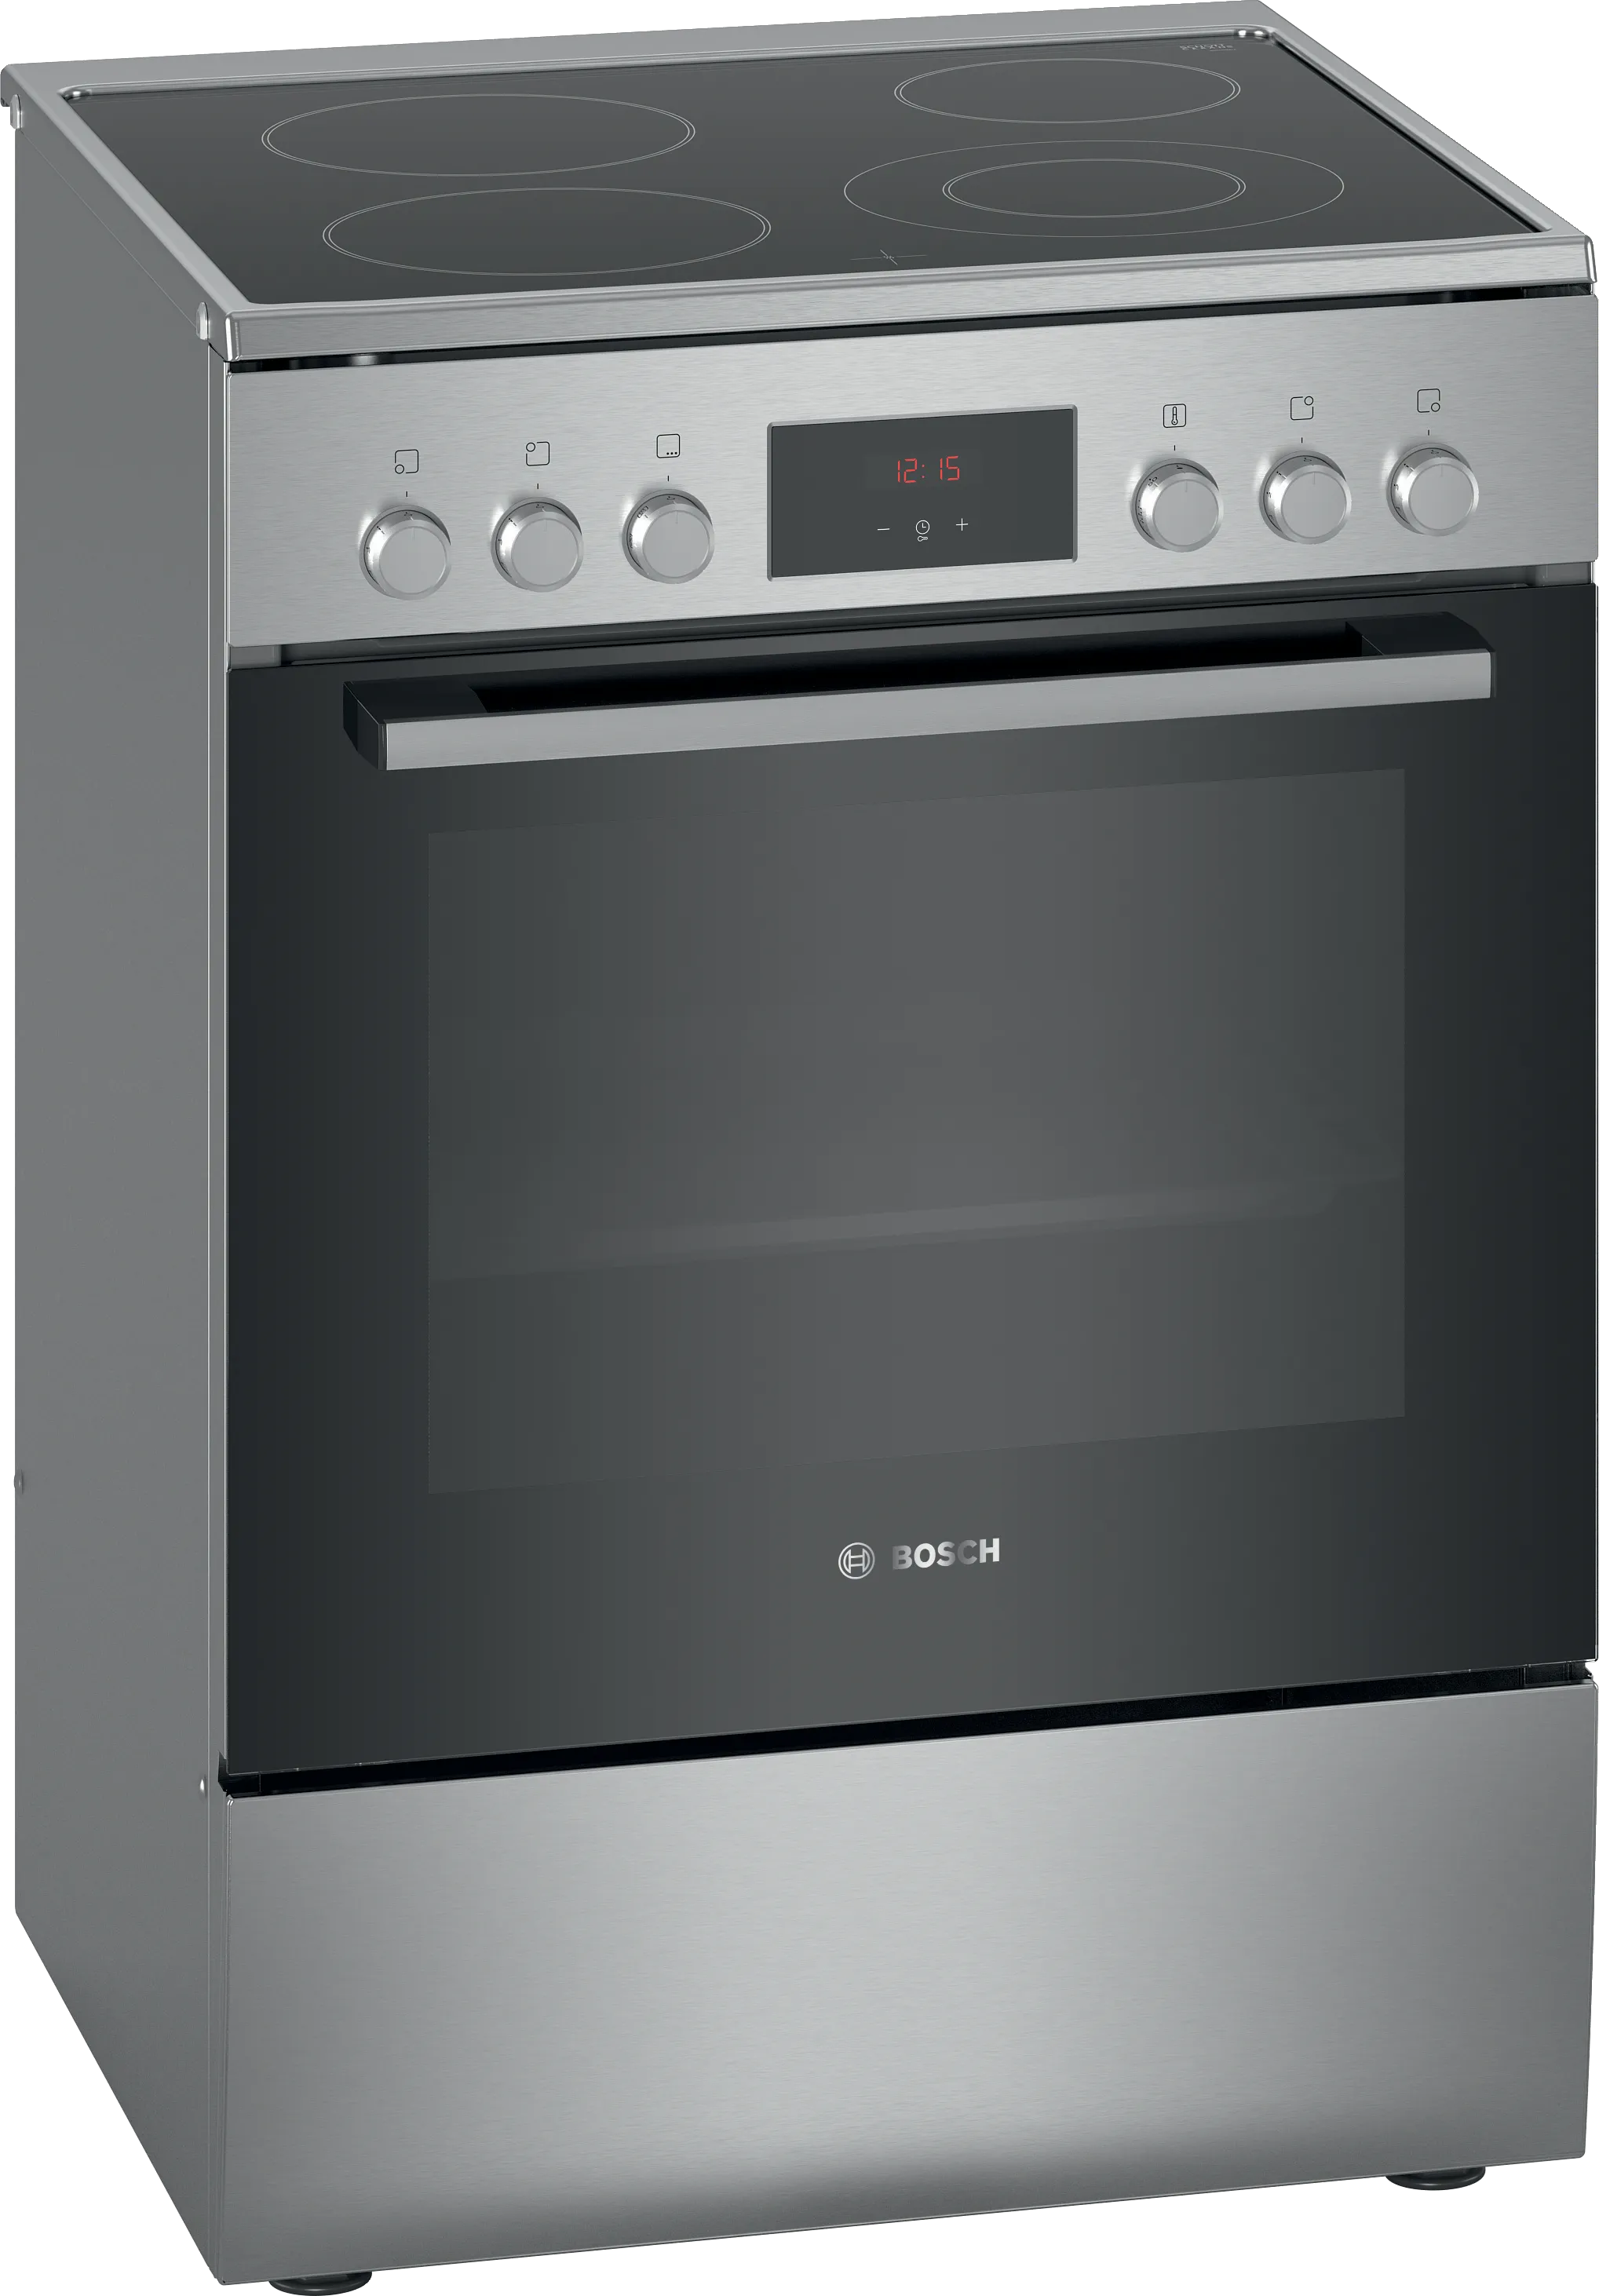 Series 4 Freestanding electric cooker Stainless steel 